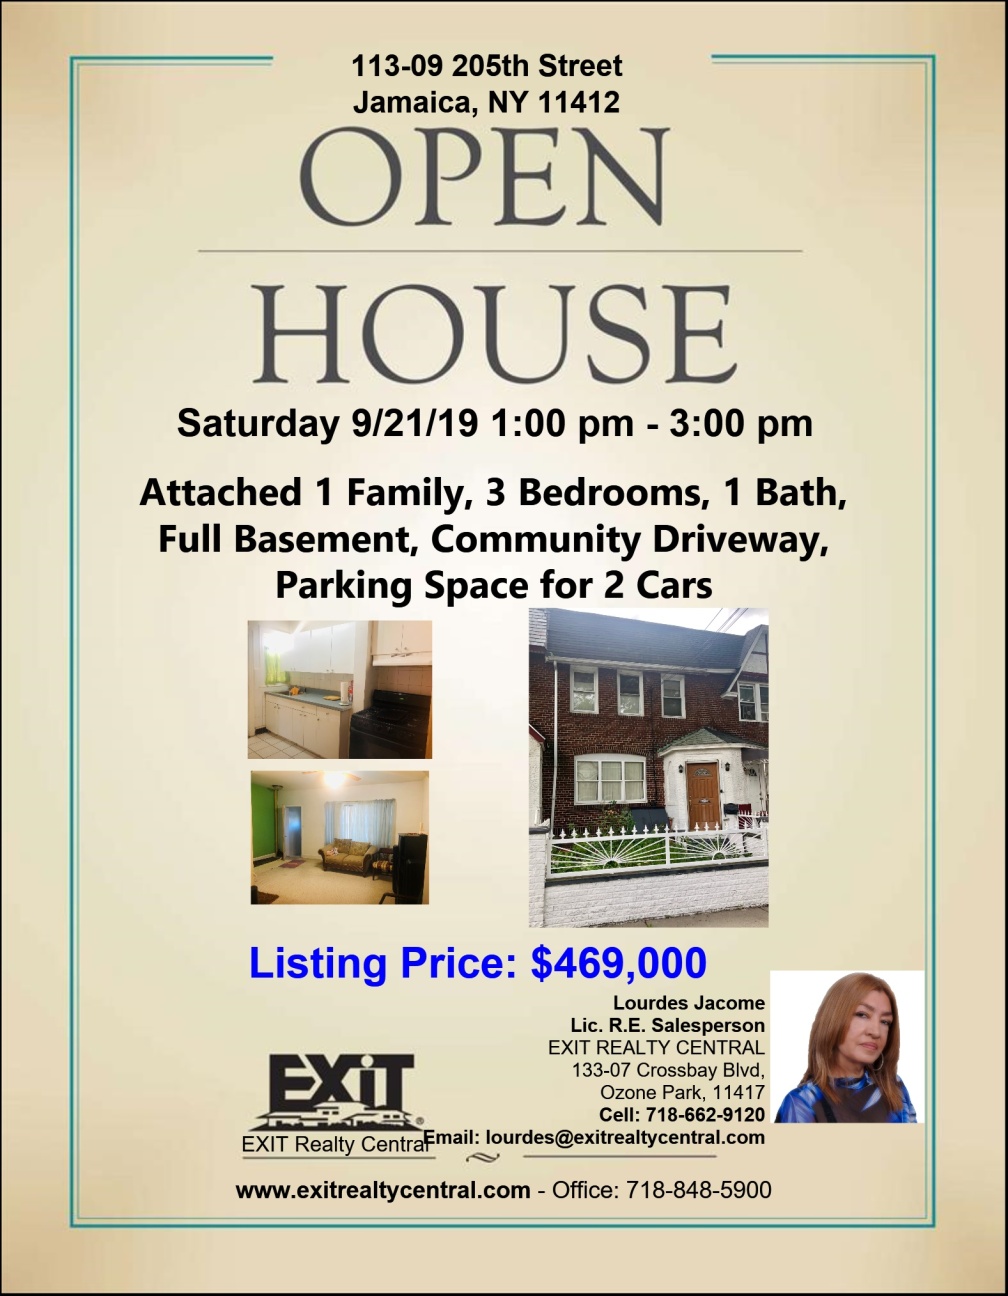 Open House is Jamaica Saturday, 9/21 1-3pm